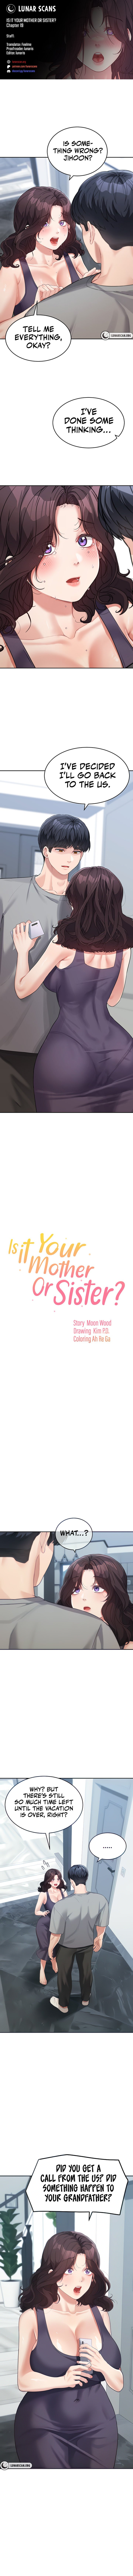 is-it-your-mother-or-sister-chap-19-0